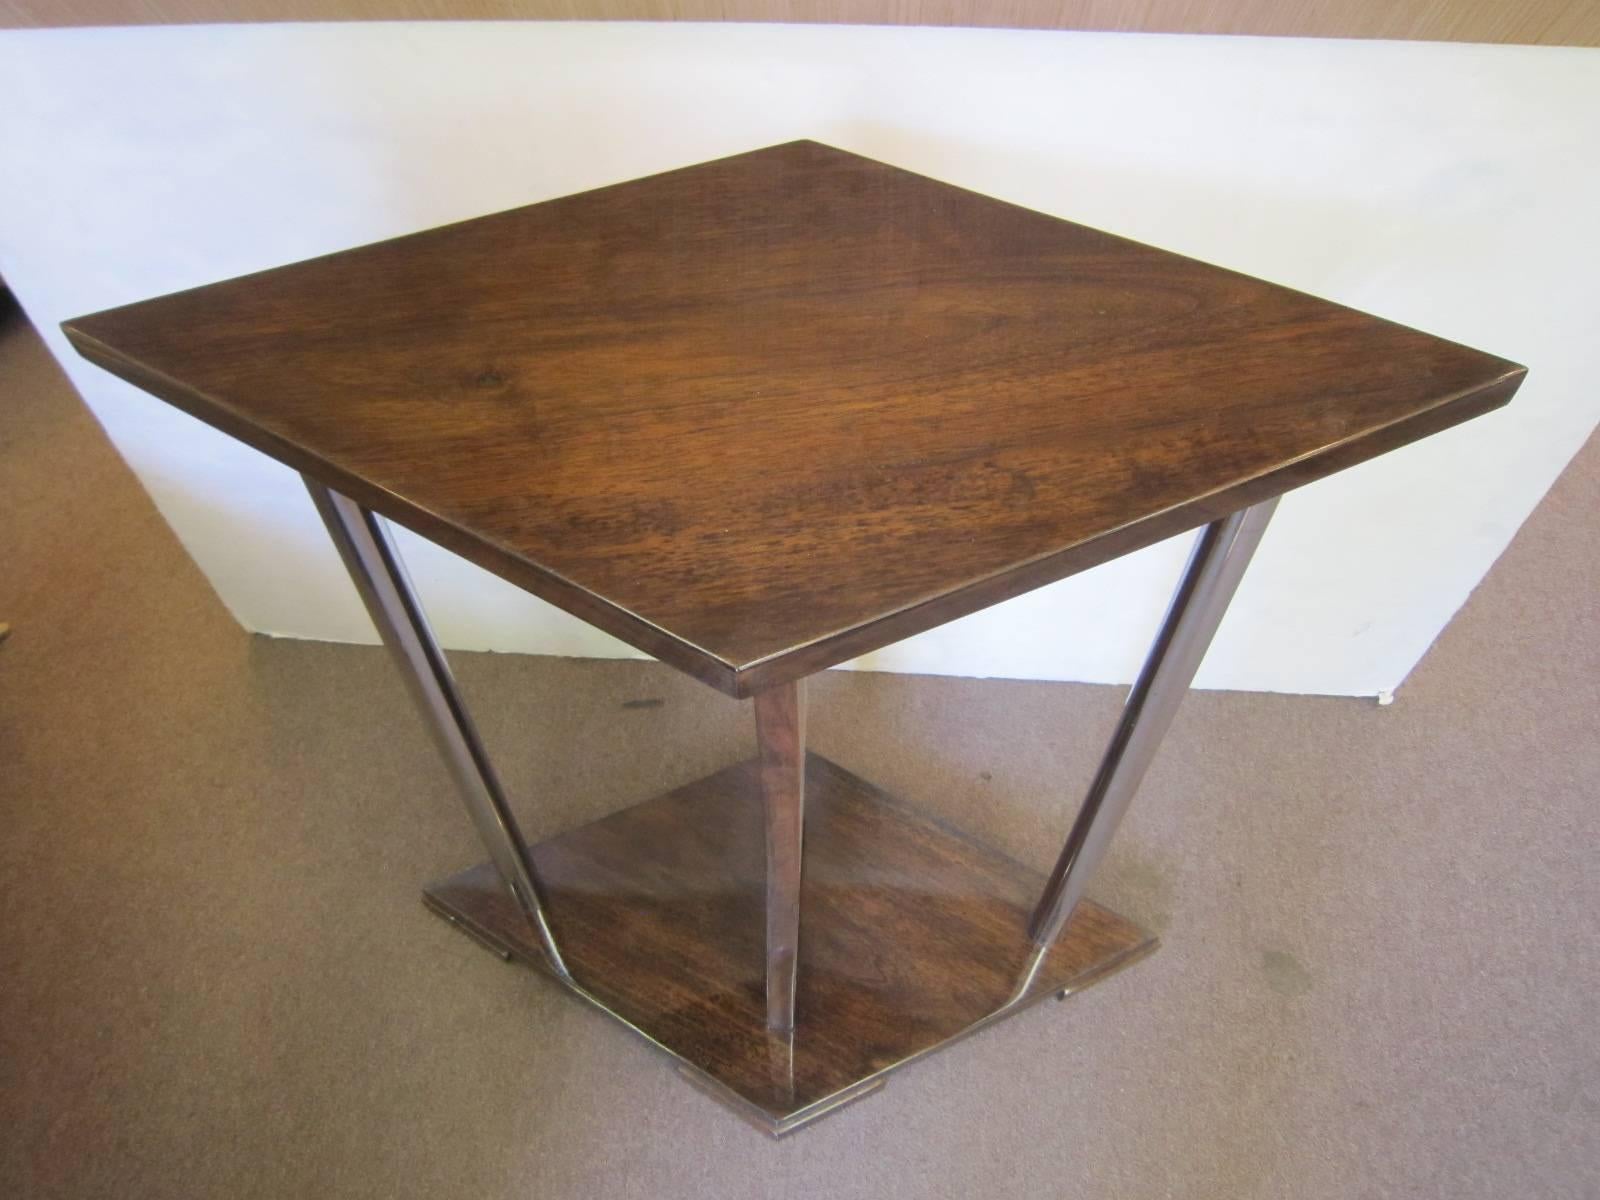 French Art Deco Unusual Diamond Shaped Walnut Side Table with Nickel Supports For Sale 7